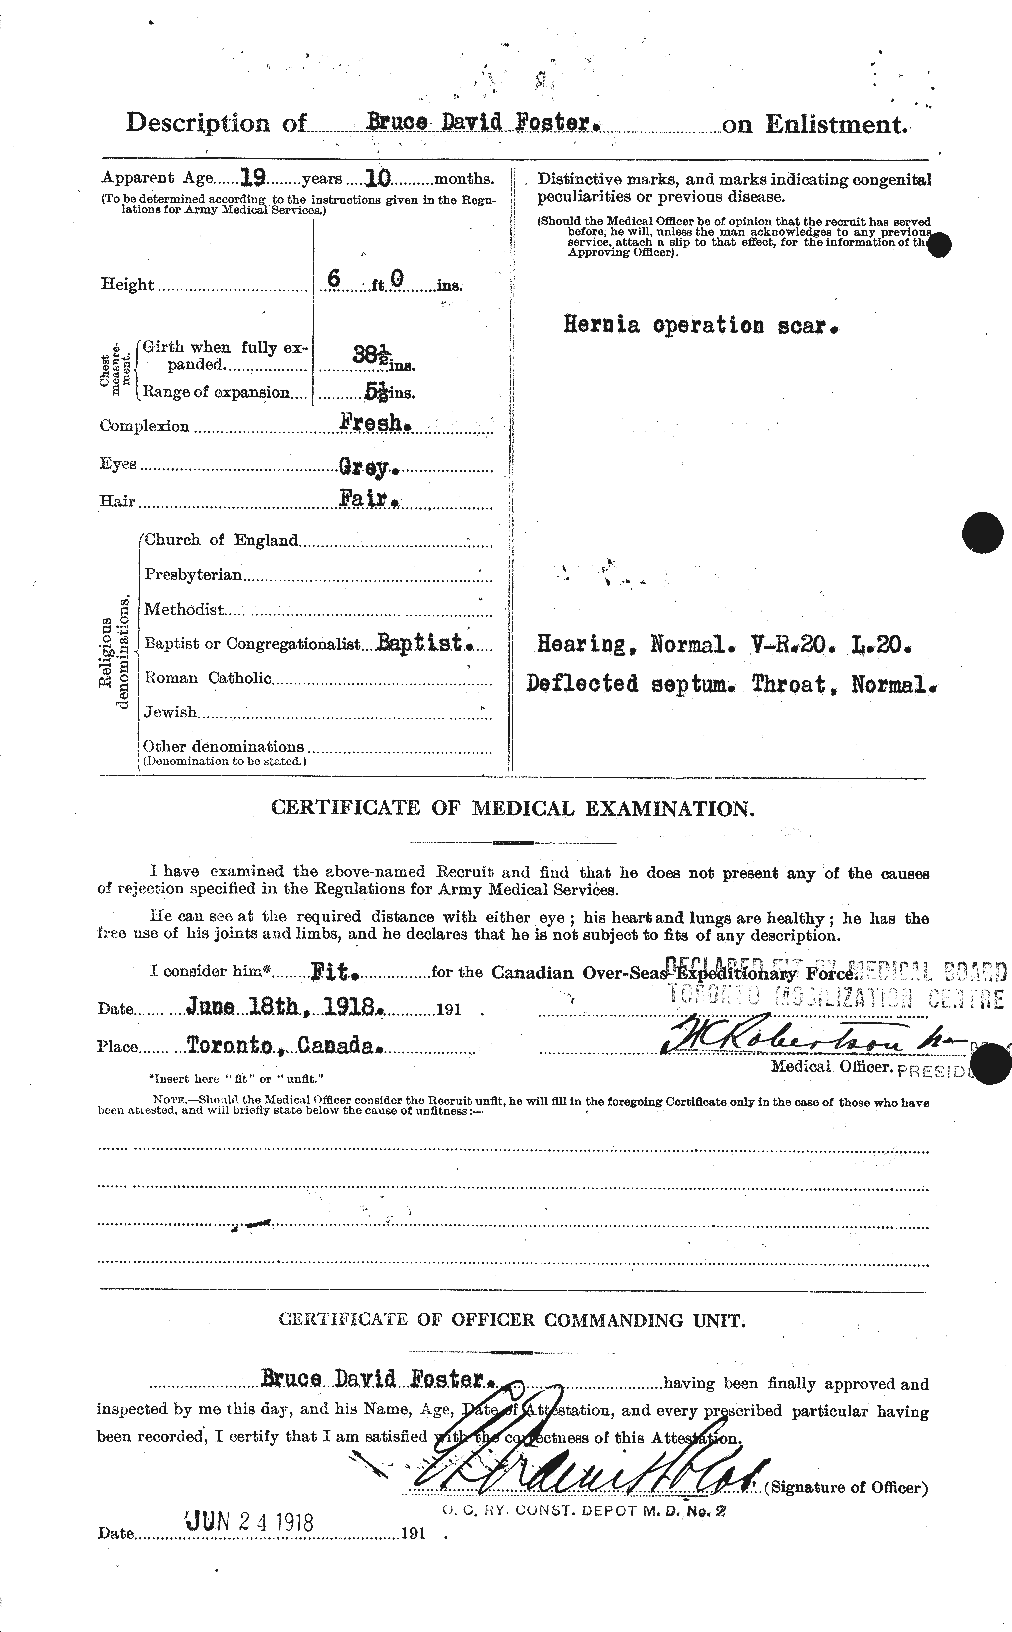 Personnel Records of the First World War - CEF 330490b